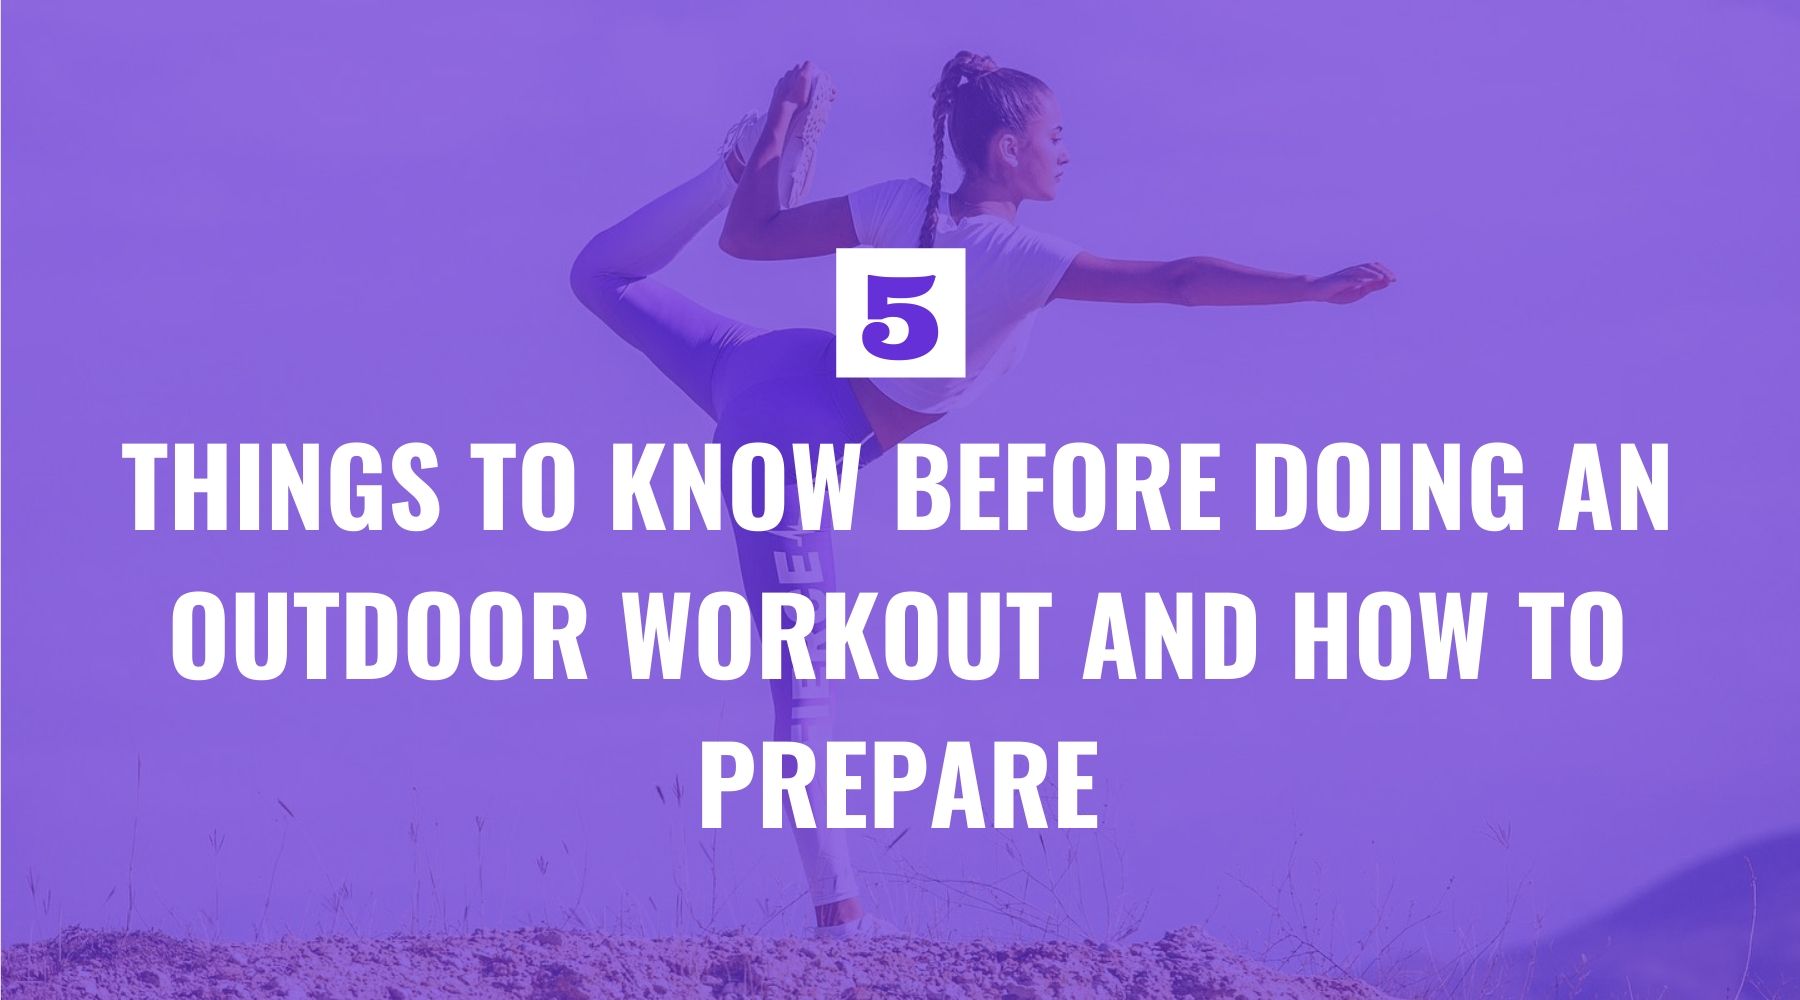 Five Things to Know Before Doing an Outdoor Workout and How to Prepare